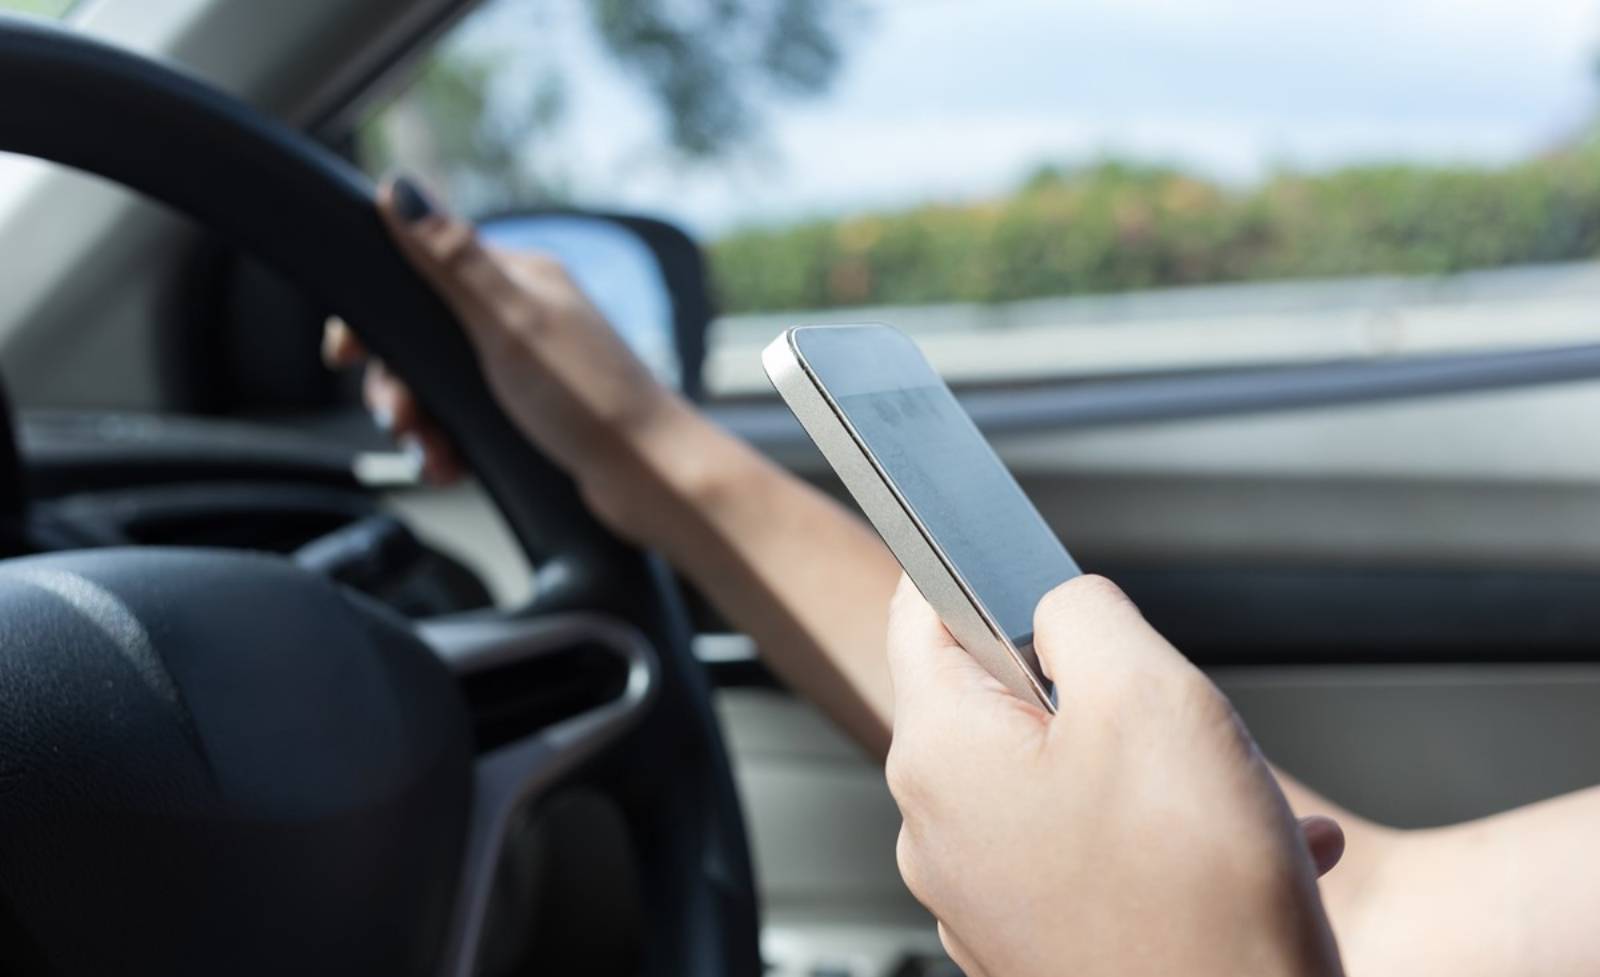 How you can use the phone behind the wheel in Car Support after the changes to the Highway Code